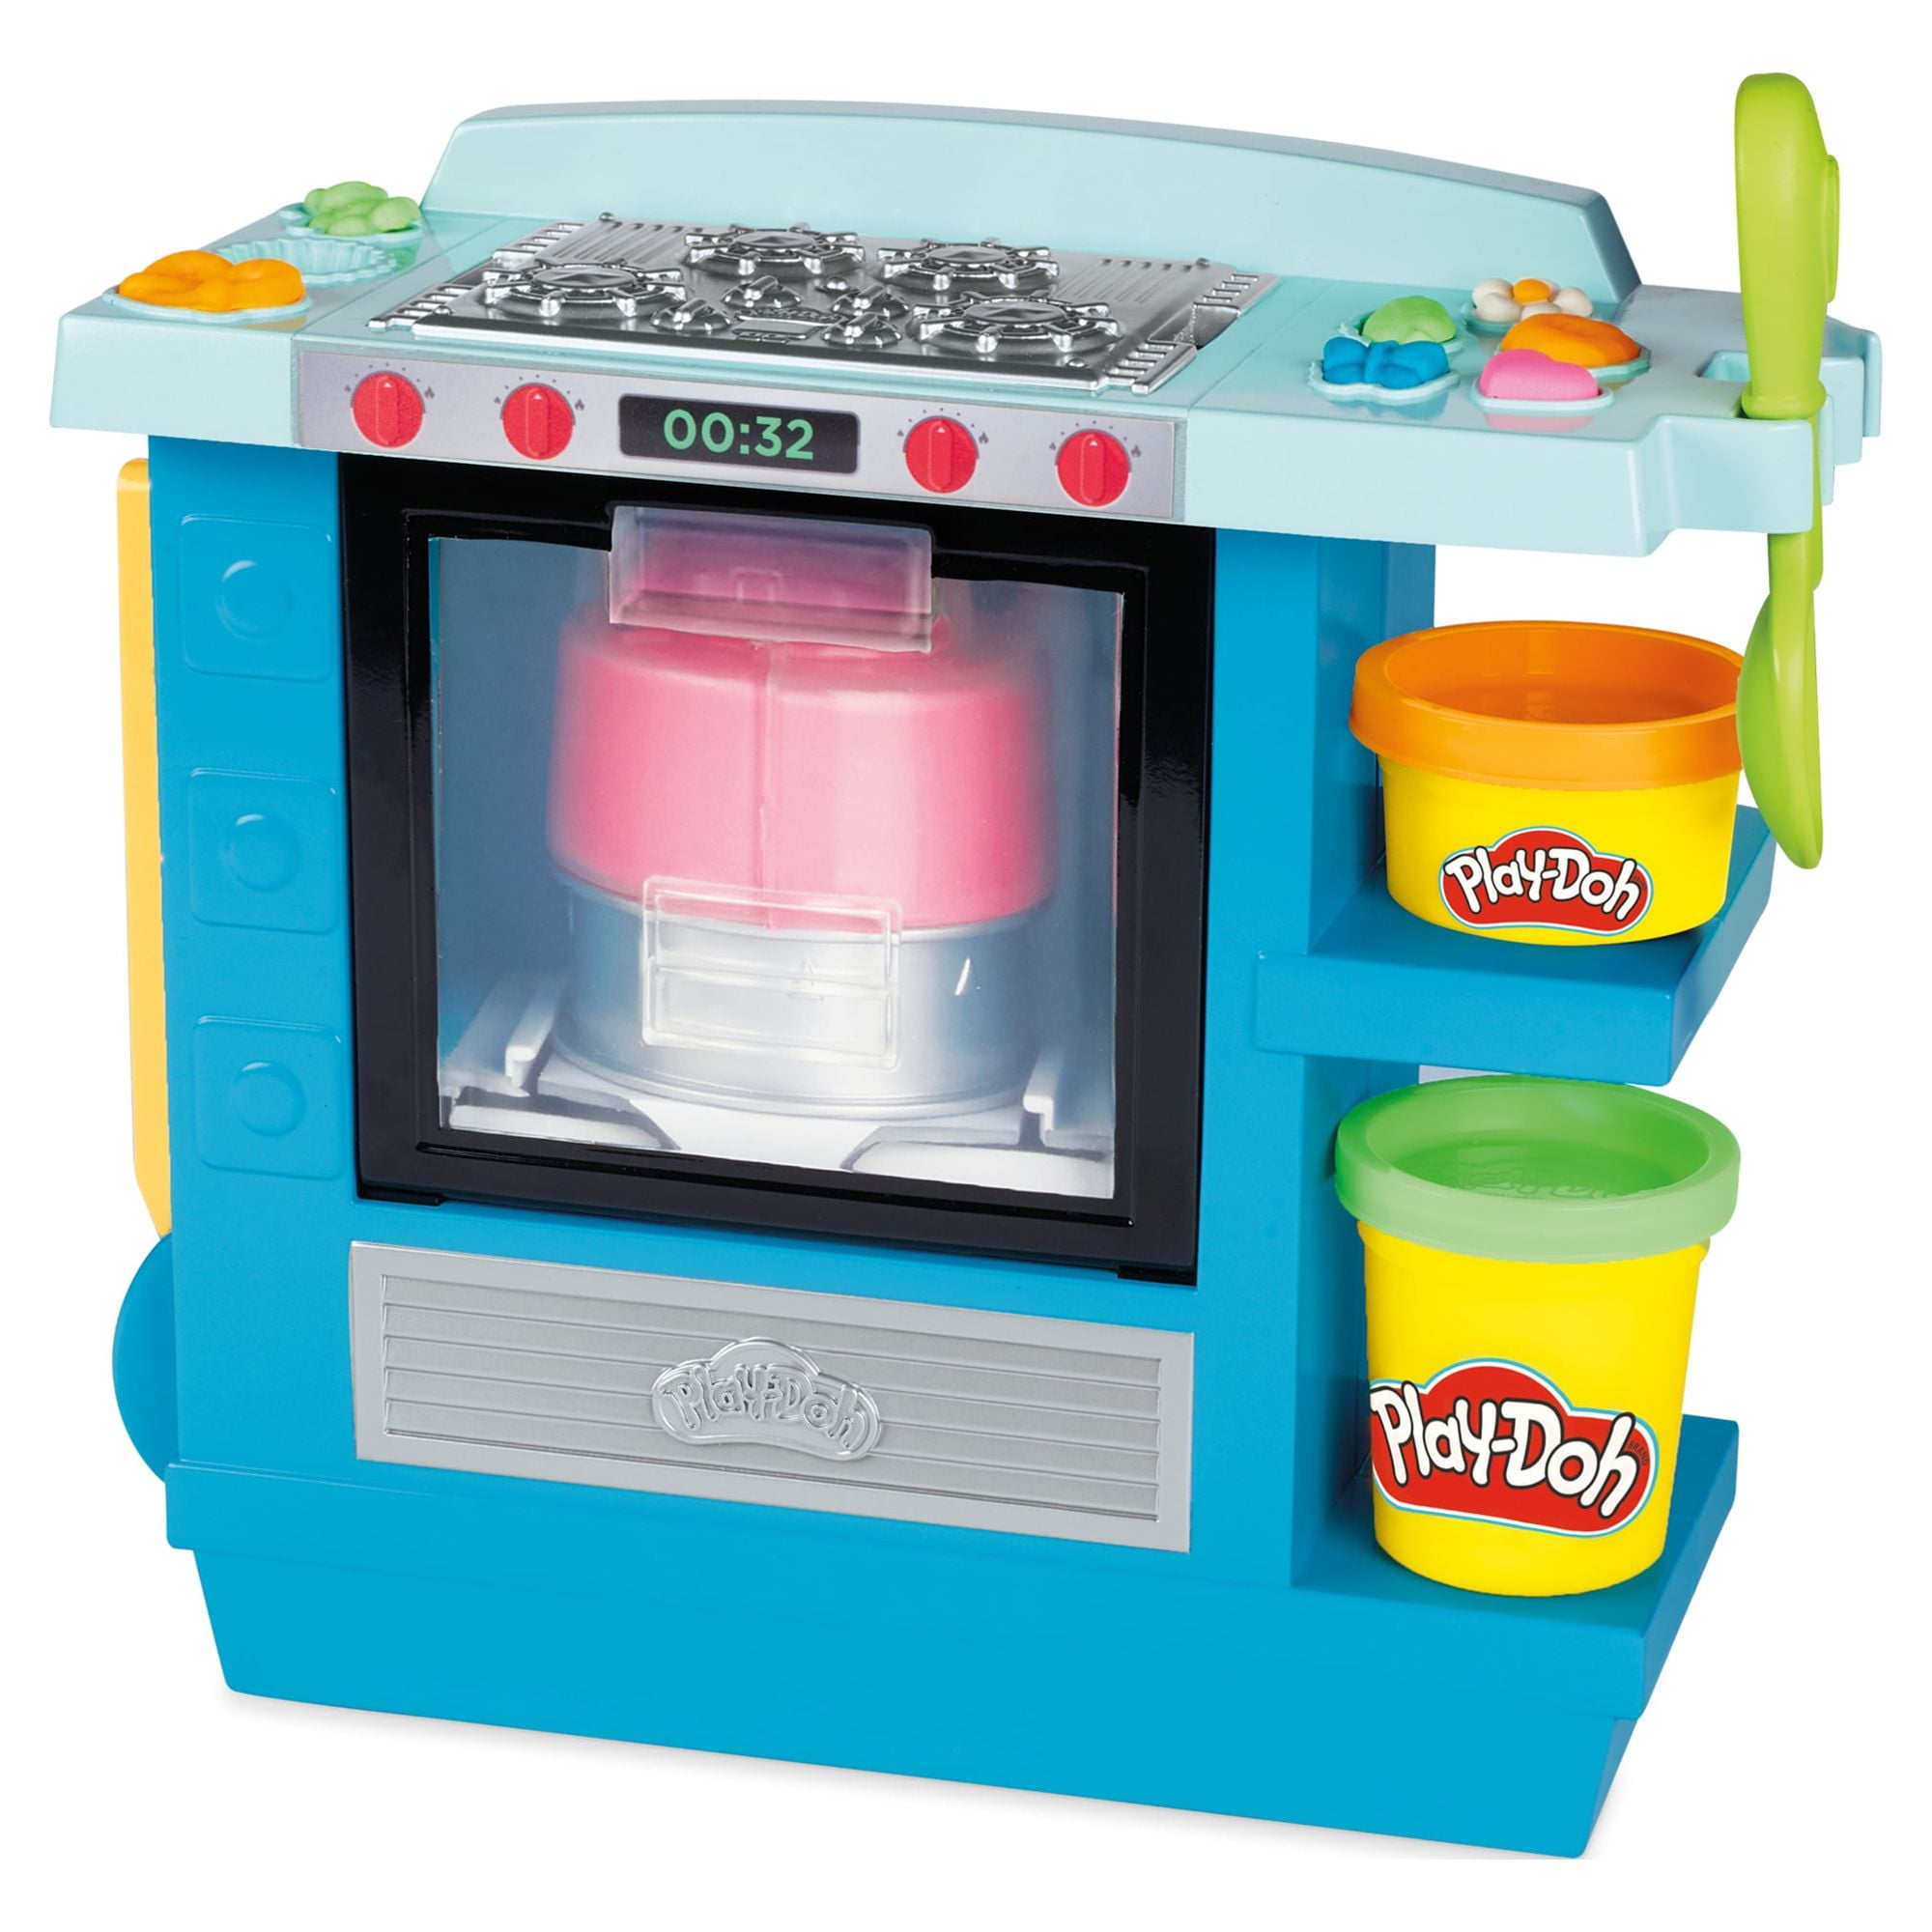 Play Doh Cake Oven Playset Assorted Colors - Office Depot